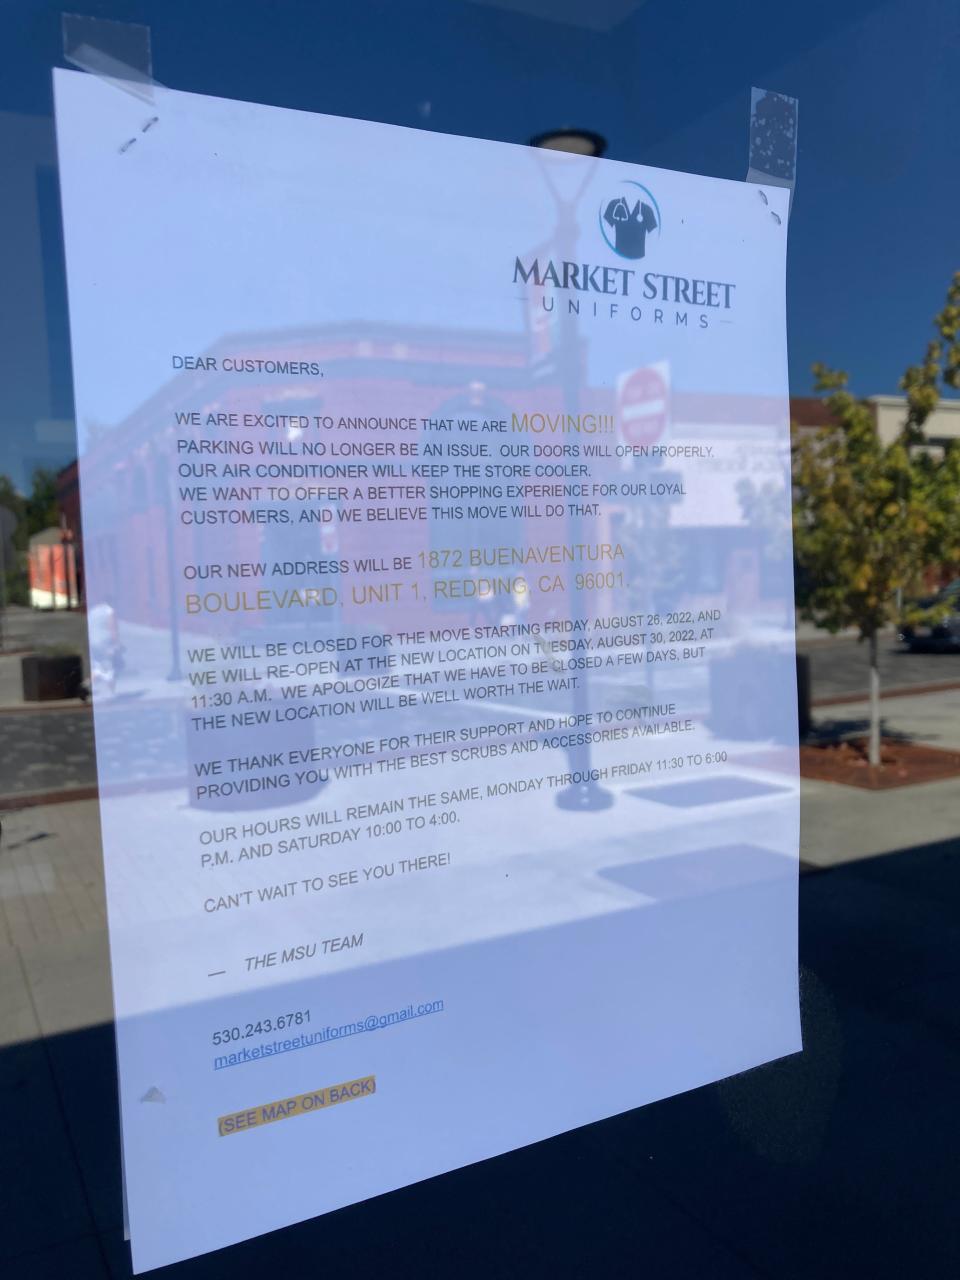 A sign was posted on the front of Market Street Uniforms announcing the move to Buenaventura Boulevard.